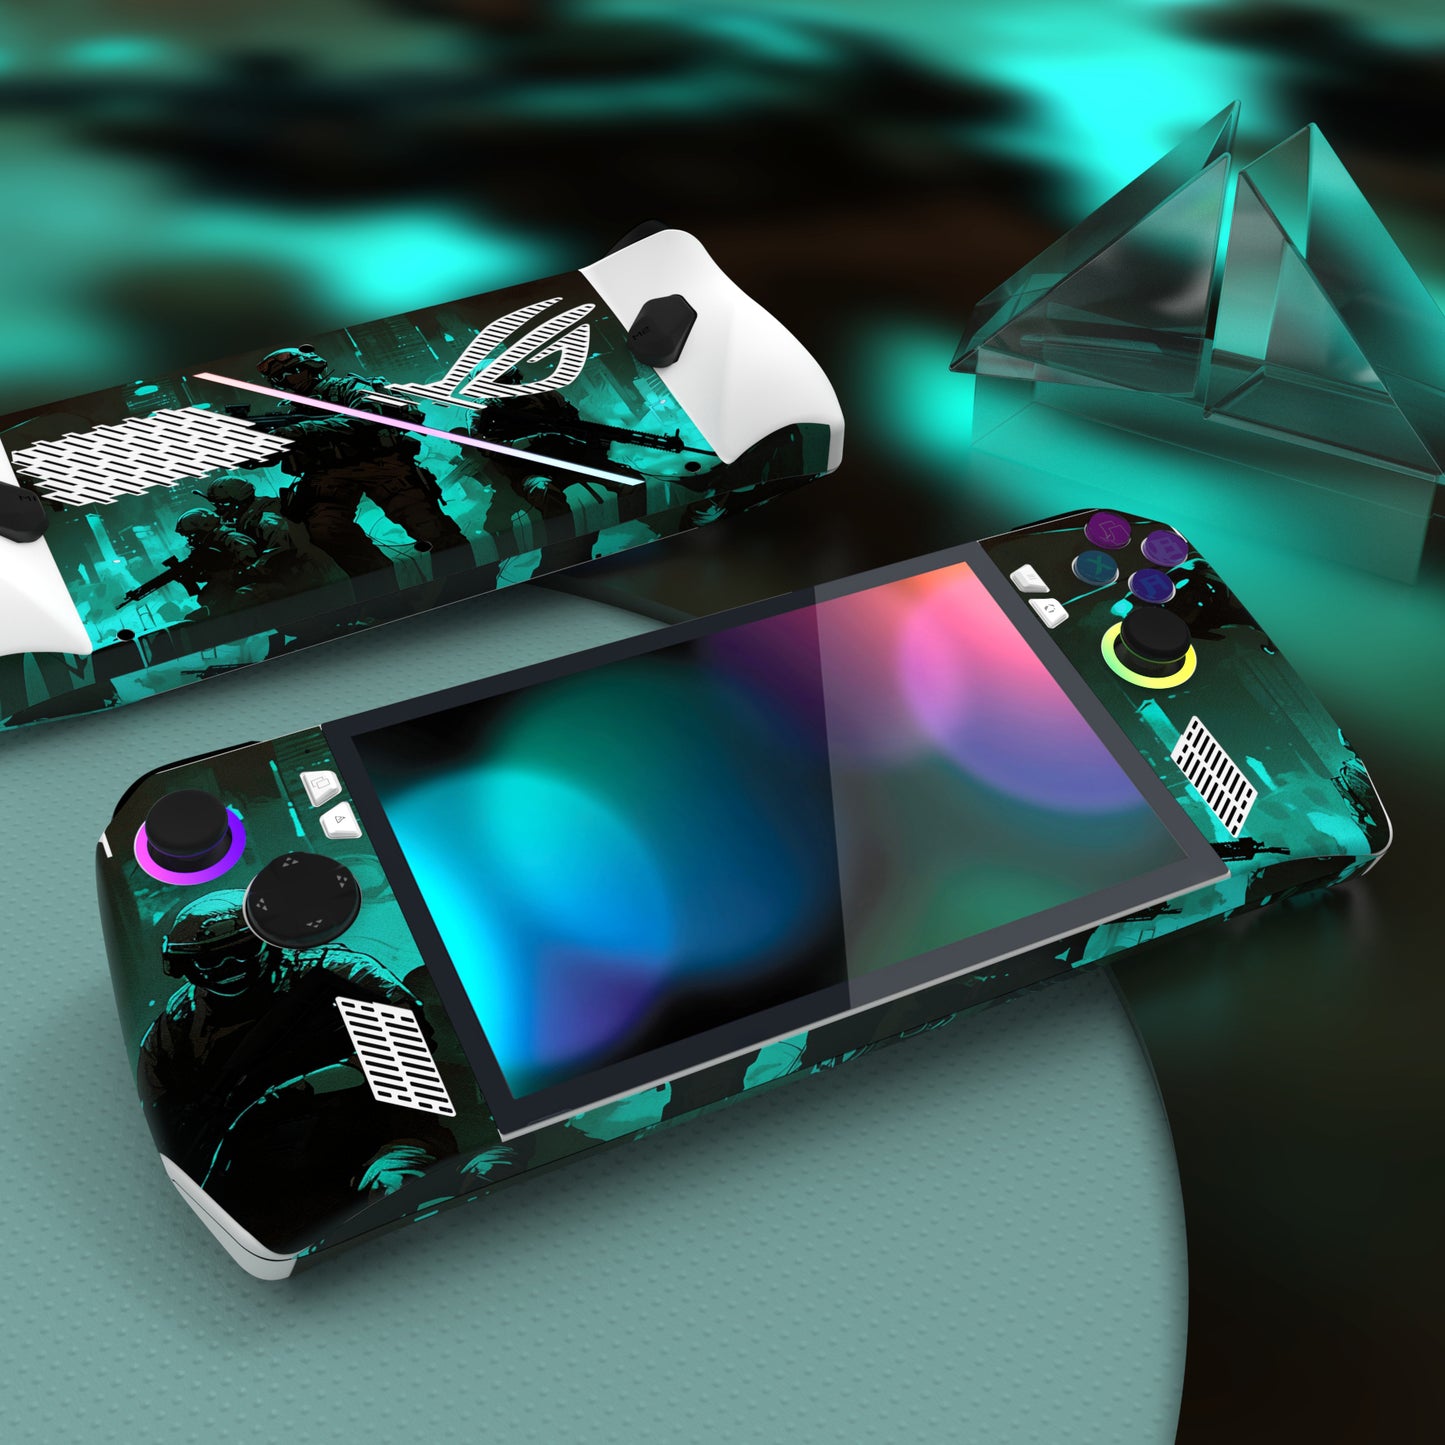 PlayVital Fearlessness Custom Stickers Vinyl Wraps Protective Skin Decal for ROG Ally Handheld Gaming Console - RGTM025 PlayVital